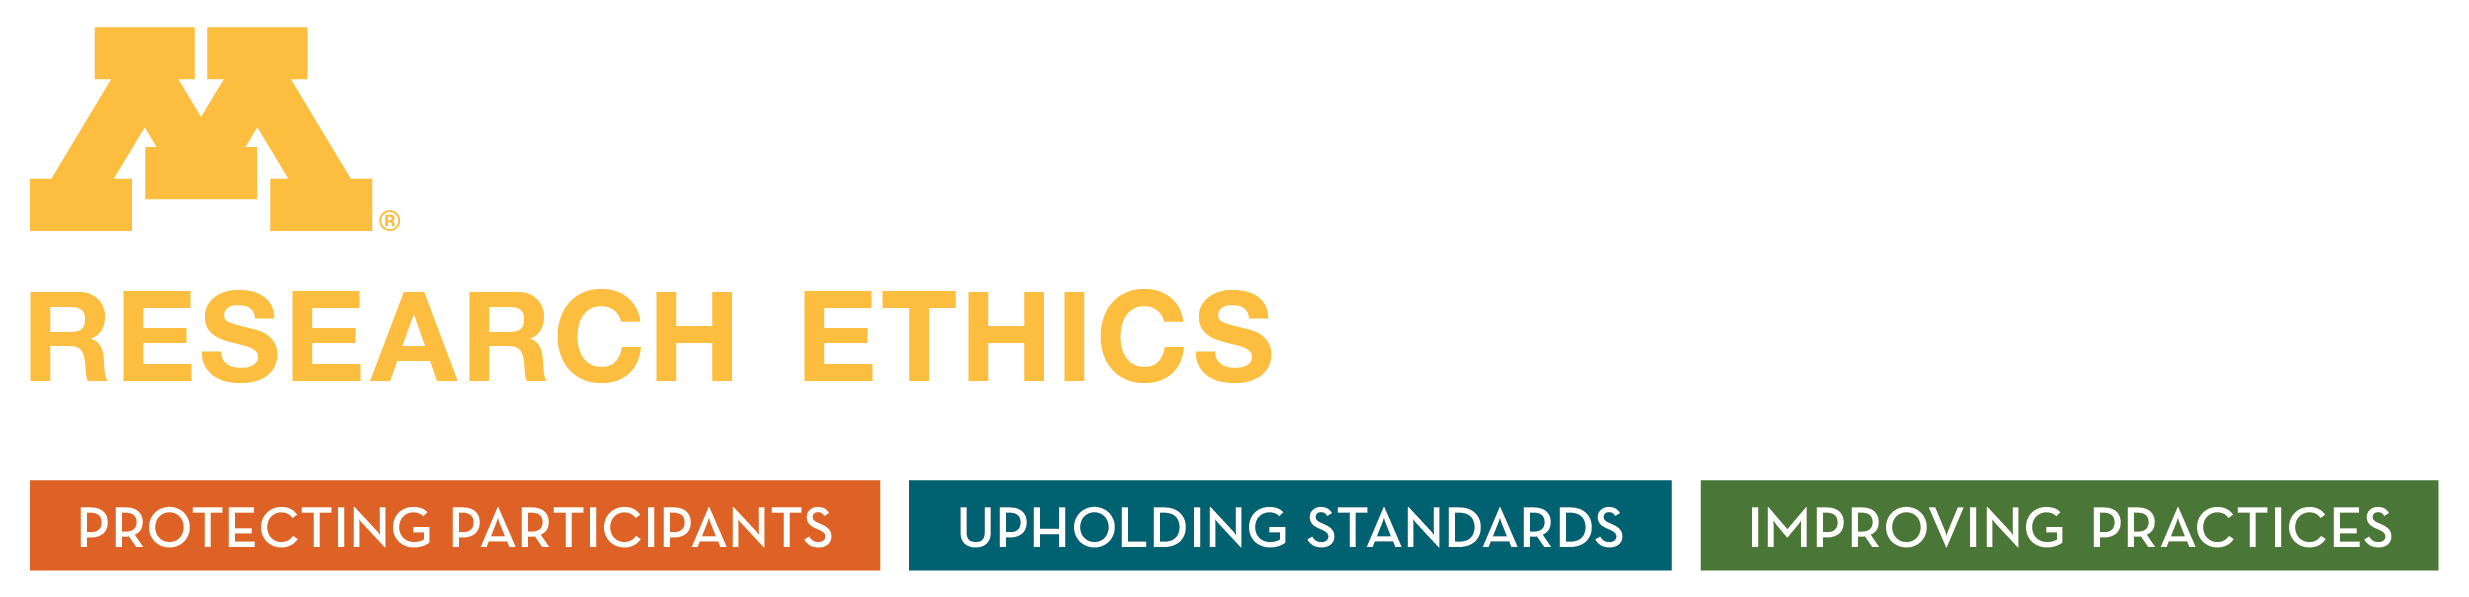 Research Ethics: Protecting participants, upholding standards, improving practices